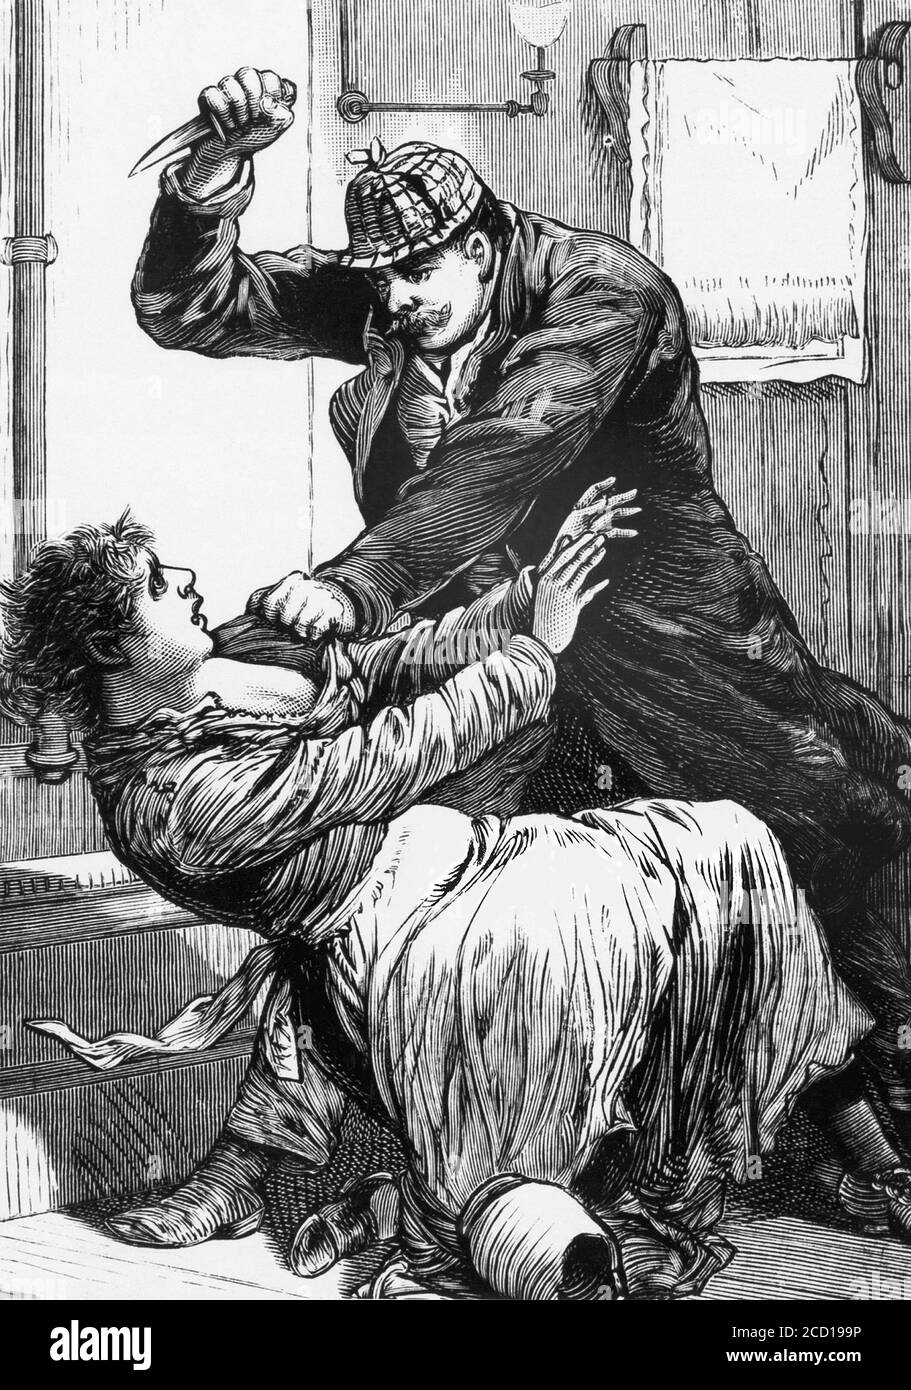 Jack the Ripper. Illustration from the National Police Gazette in February 1889 entitled 'Another Victim of Jack the Ripper - Alleged Attack on Pretty Miss Eisenhart in the Cooper Hospital, Camden, N. J., Slashing Her in a Terrible Manner' Stock Photo